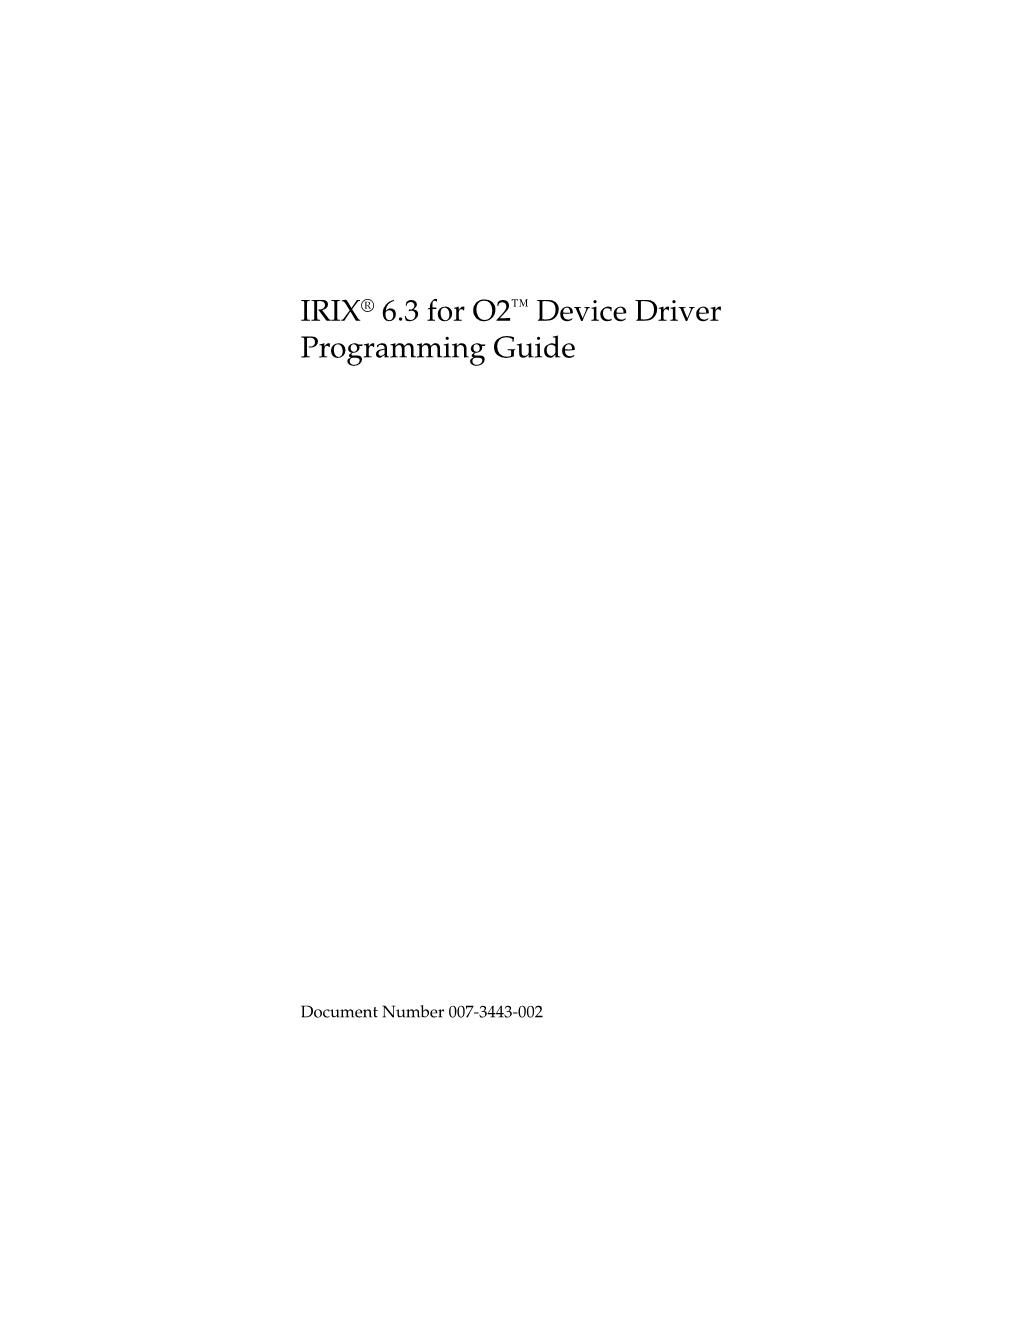 IRIX® 6.3 for O2™ Device Driver Programming Guide